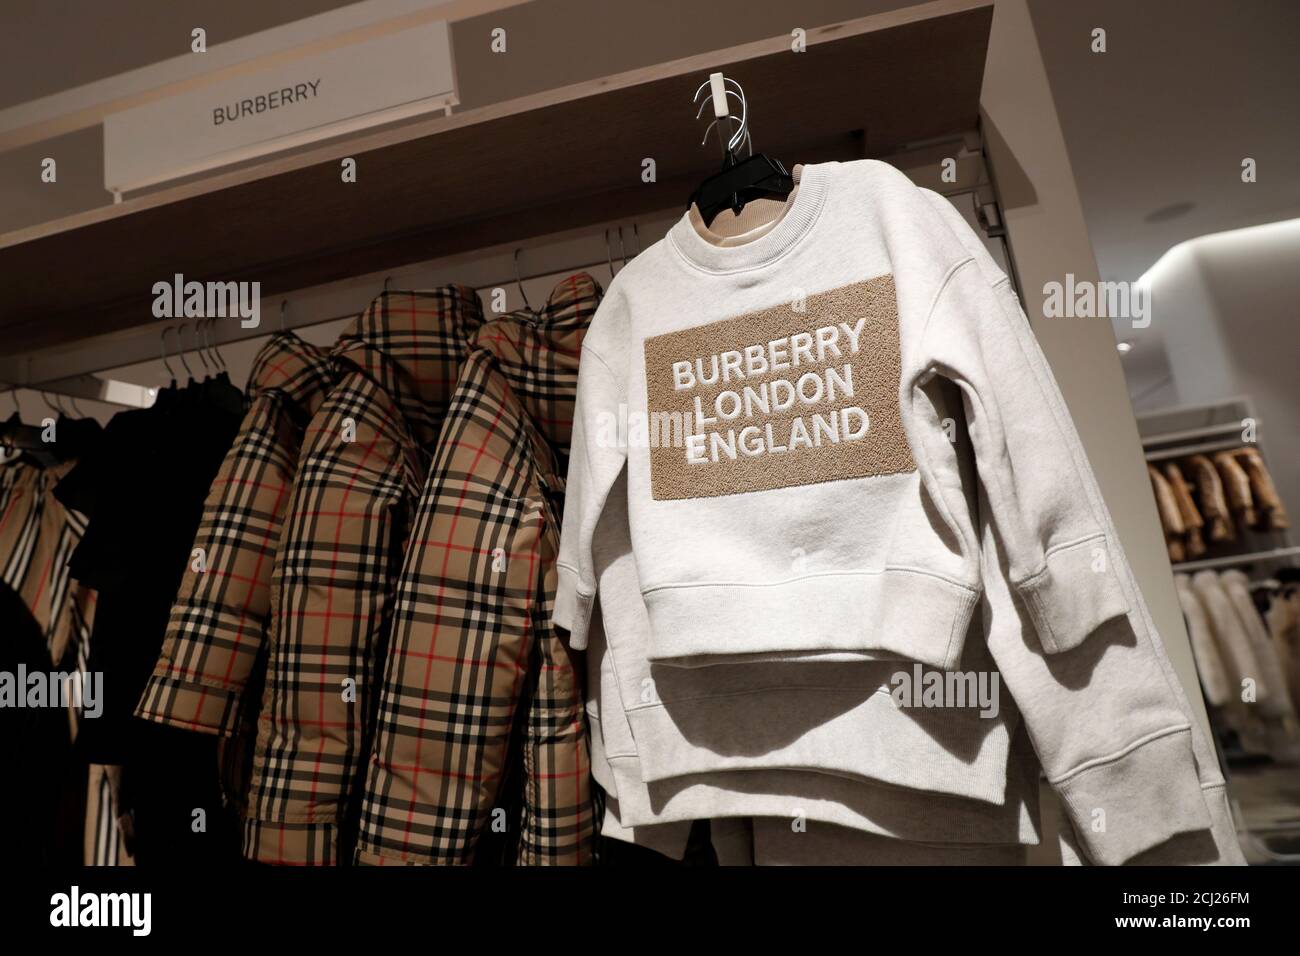 Children's Burberry clothes are seen on display at the Nordstrom flagship  store during a media preview in New York, U.S., October 21, 2019.  REUTERS/Shannon Stapleton Stock Photo - Alamy